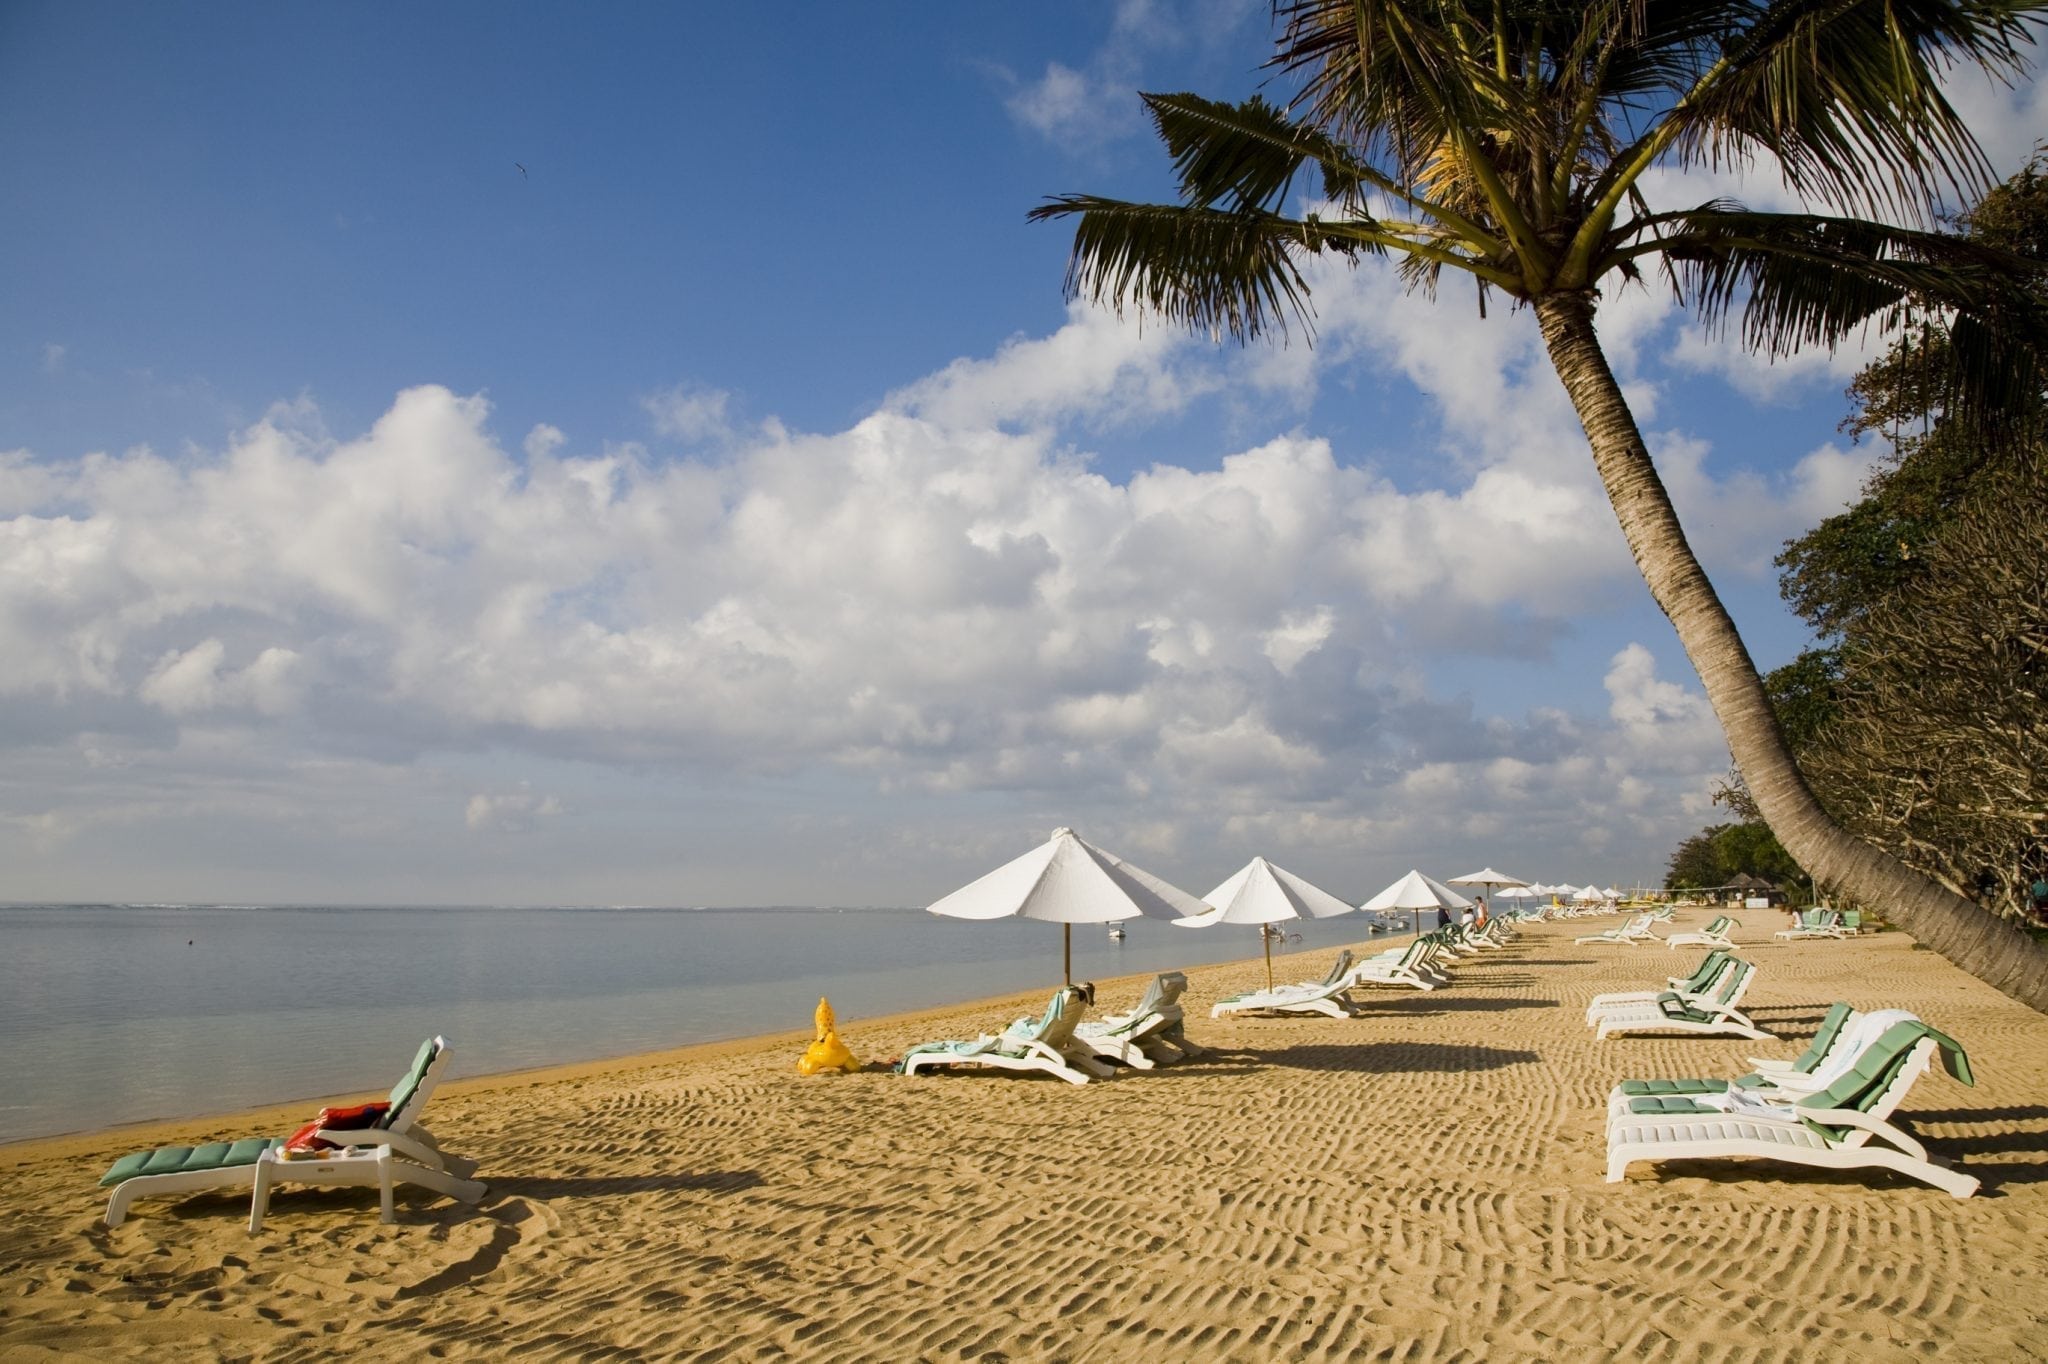 Sanur is Bali's oldest upscale resort area and is a mature beach-side town